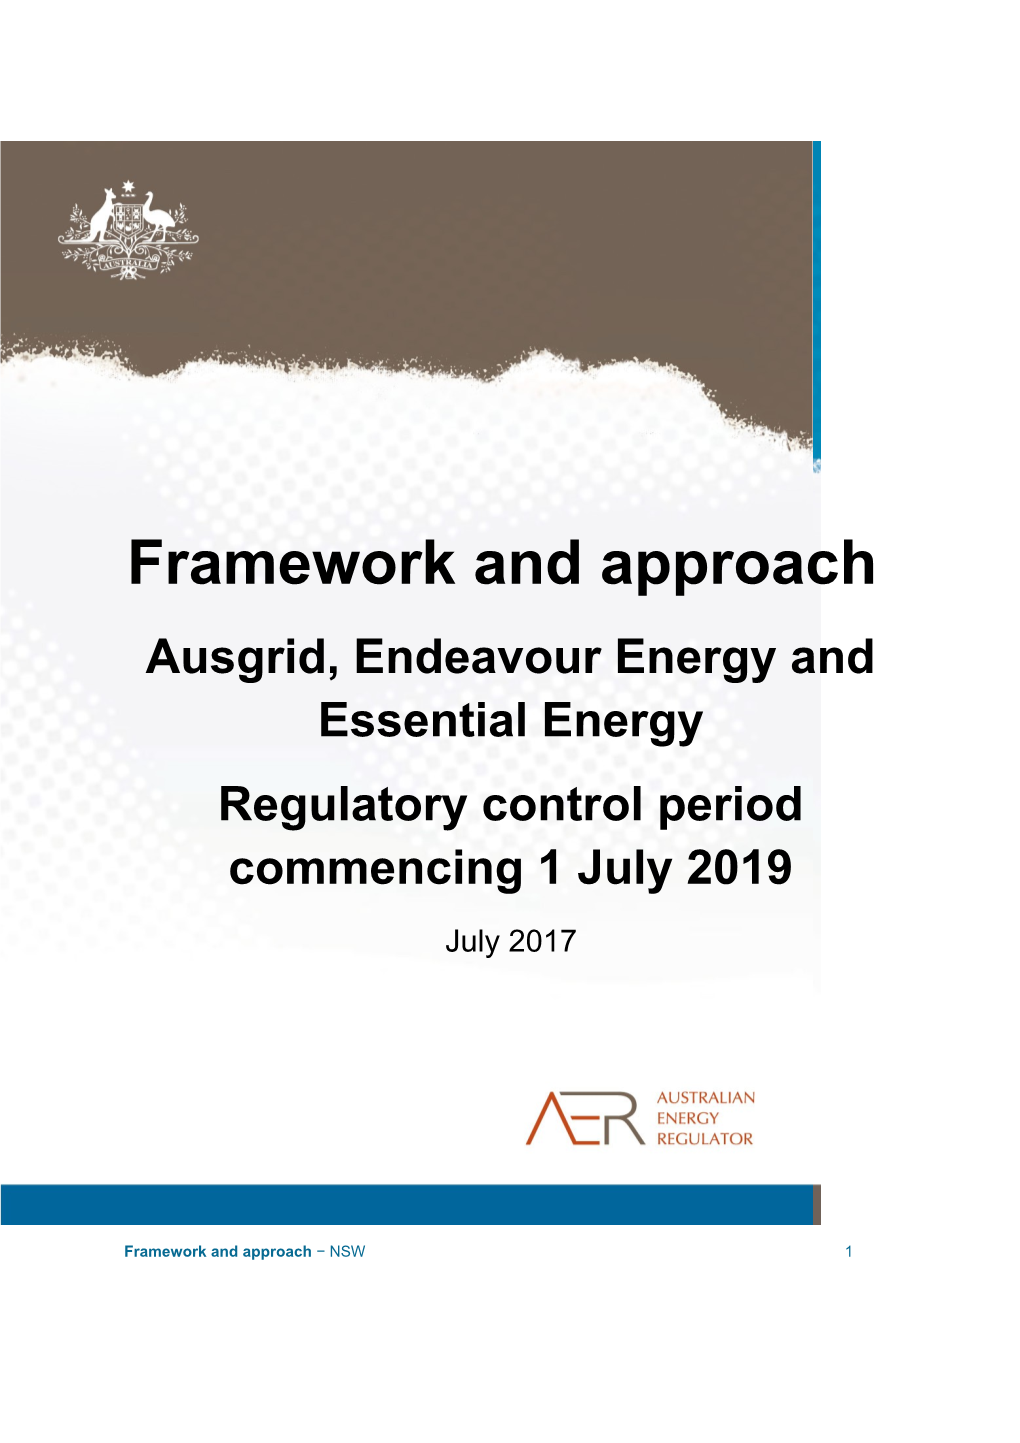 Ausgrid, Endeavour Energy and Essential Energy